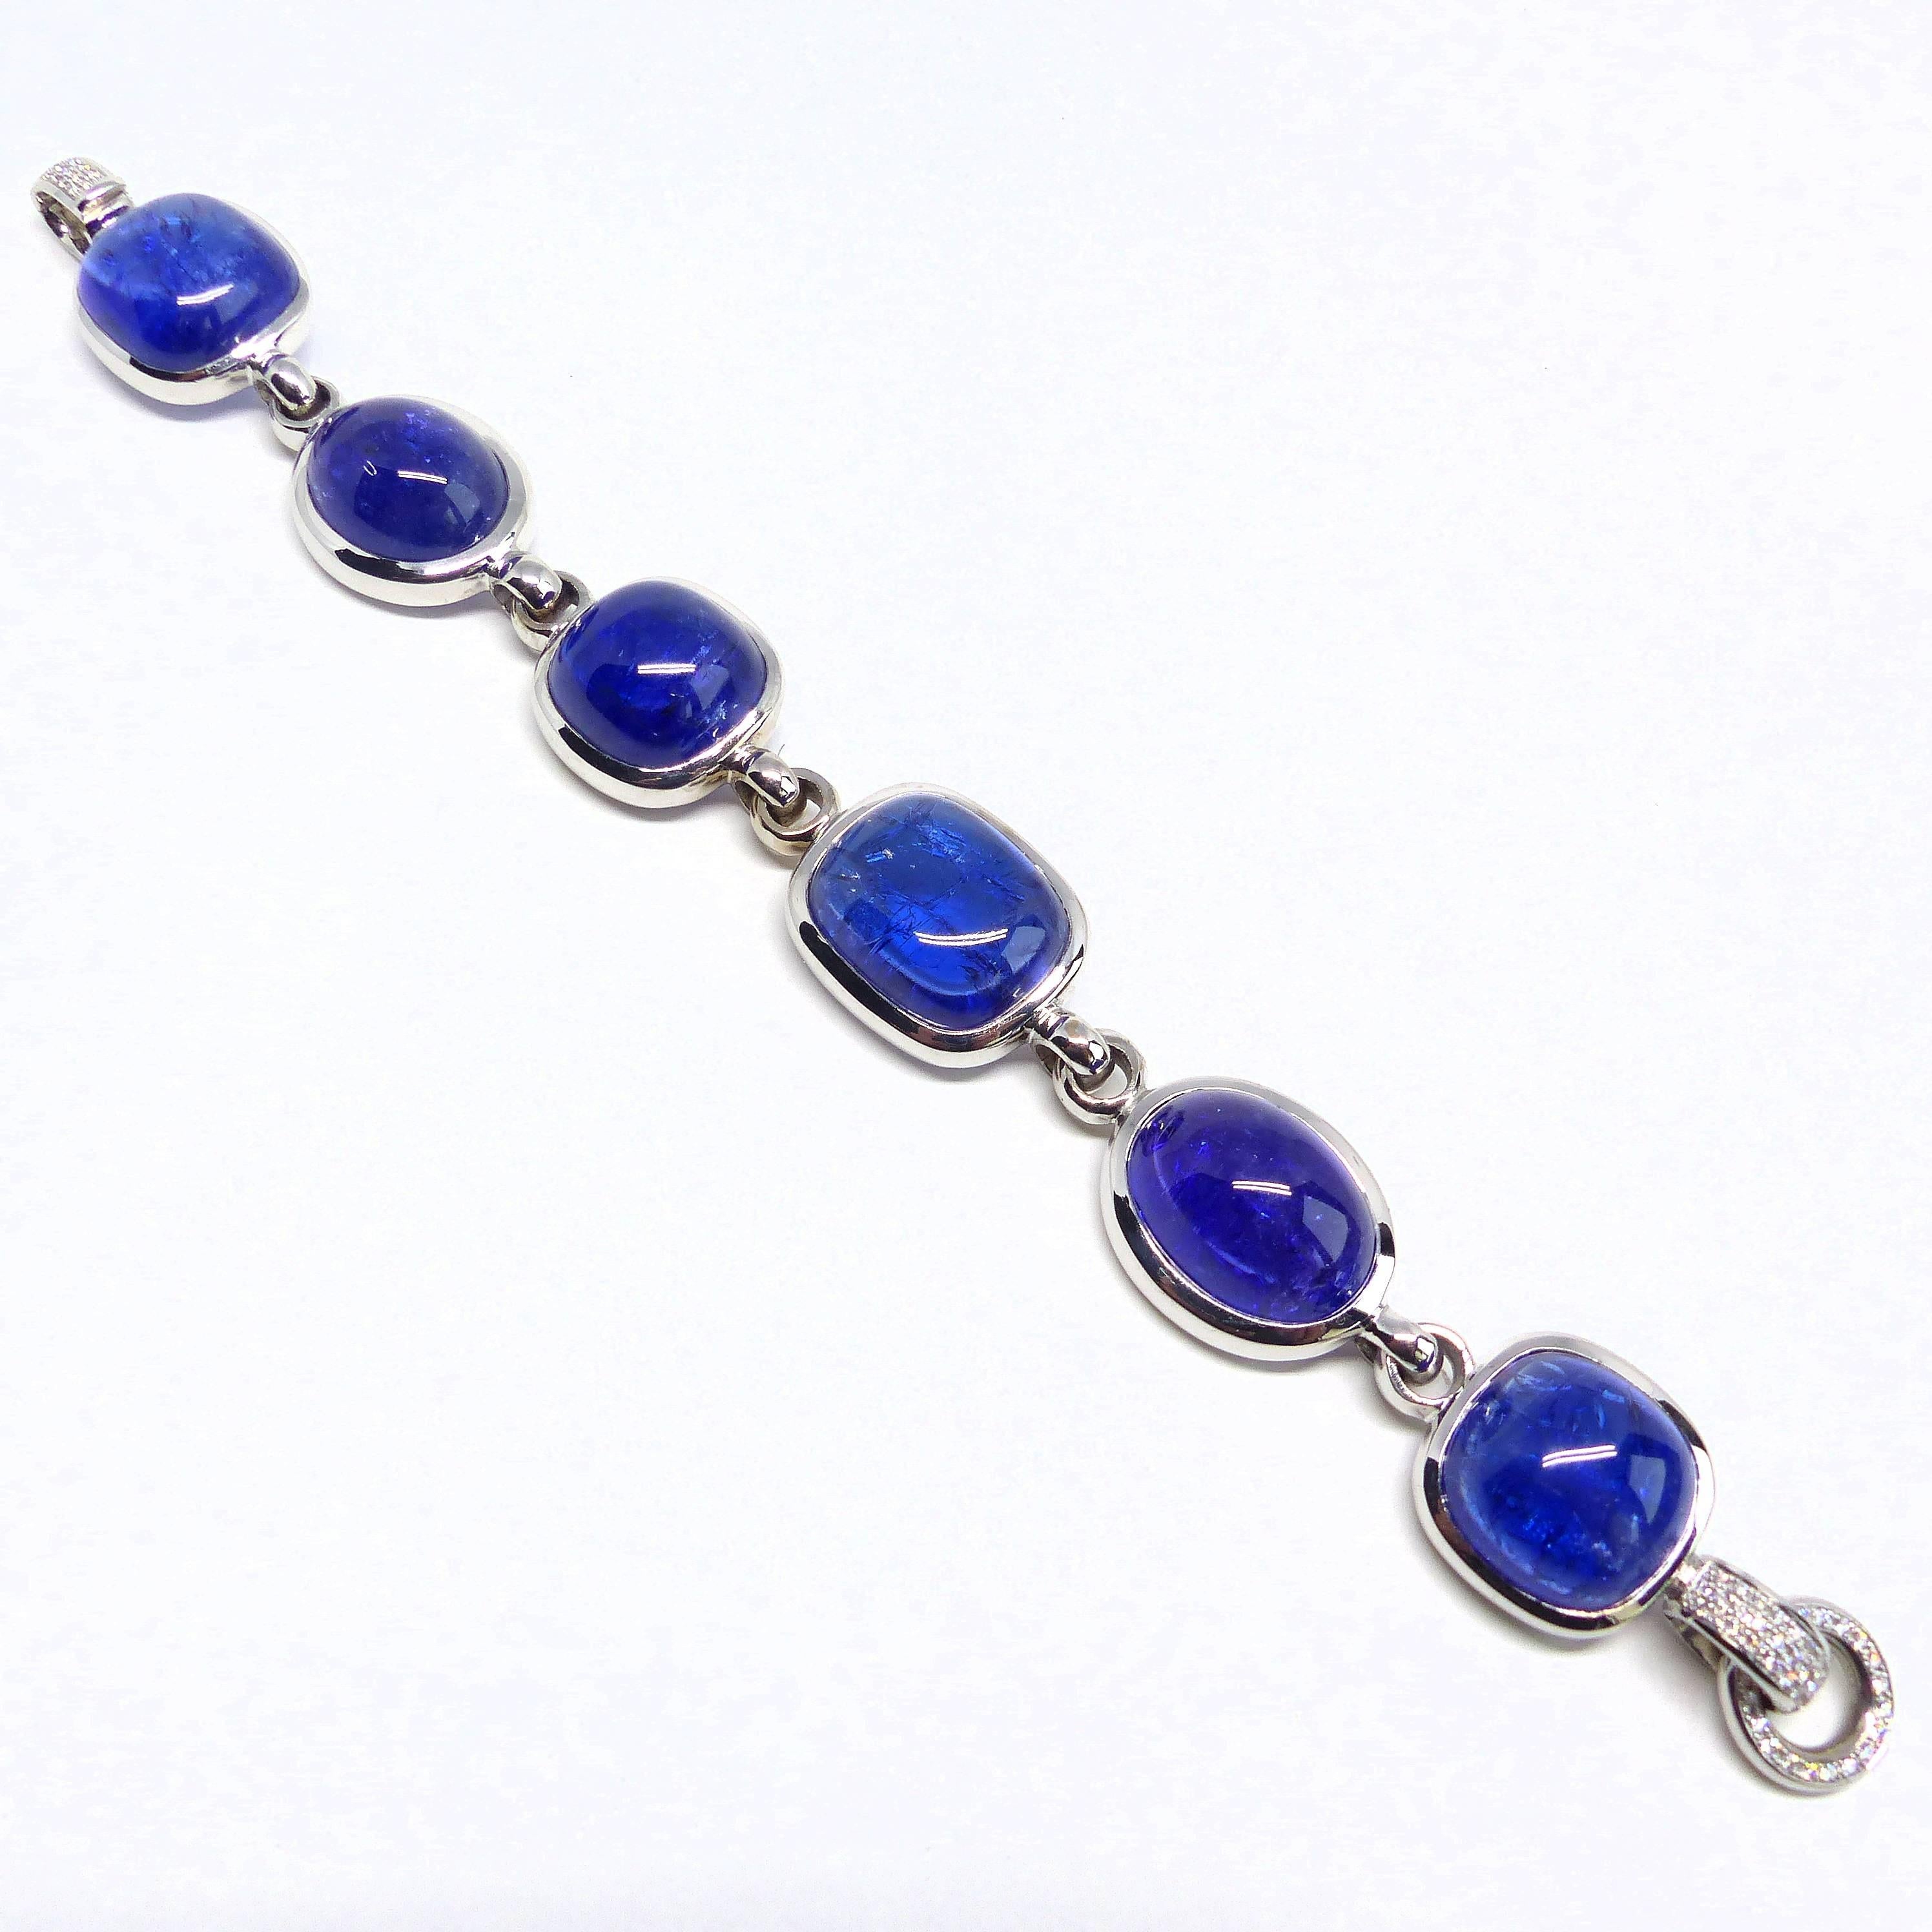 Thomas Leyser is renowned for his contemporary jewellery designs utilizing fine gemstones. 

This 18k white gold (78g) bracelet is set with 6x fine Tanzanite Cabouchons (156.65ct in total), in various shapes, accentuated by 67 diamonds pavé G(VS) in